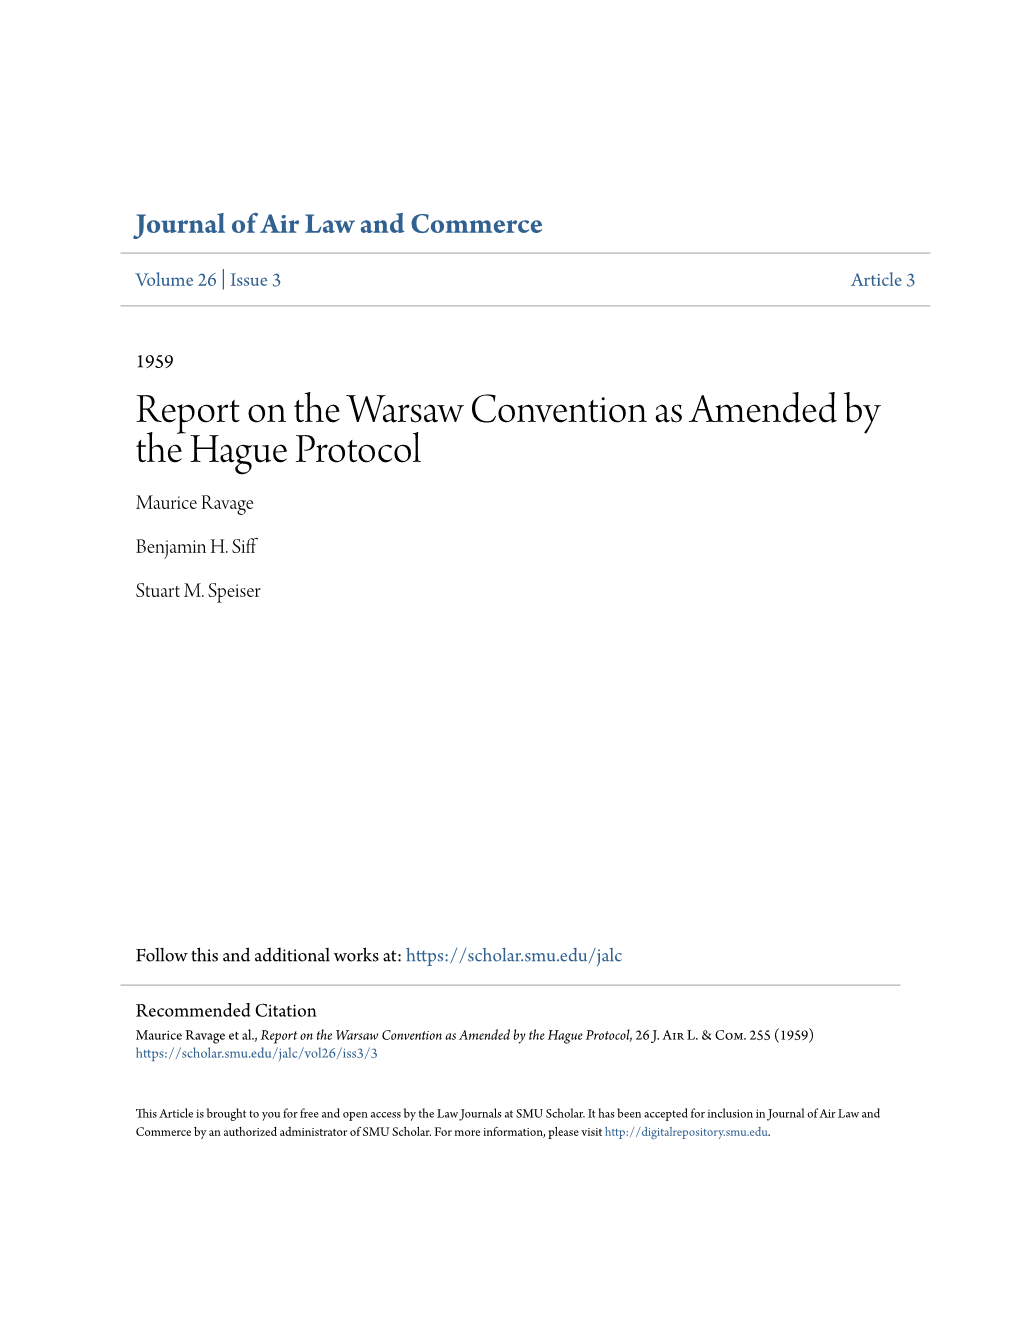 Report on the Warsaw Convention As Amended by the Hague Protocol Maurice Ravage